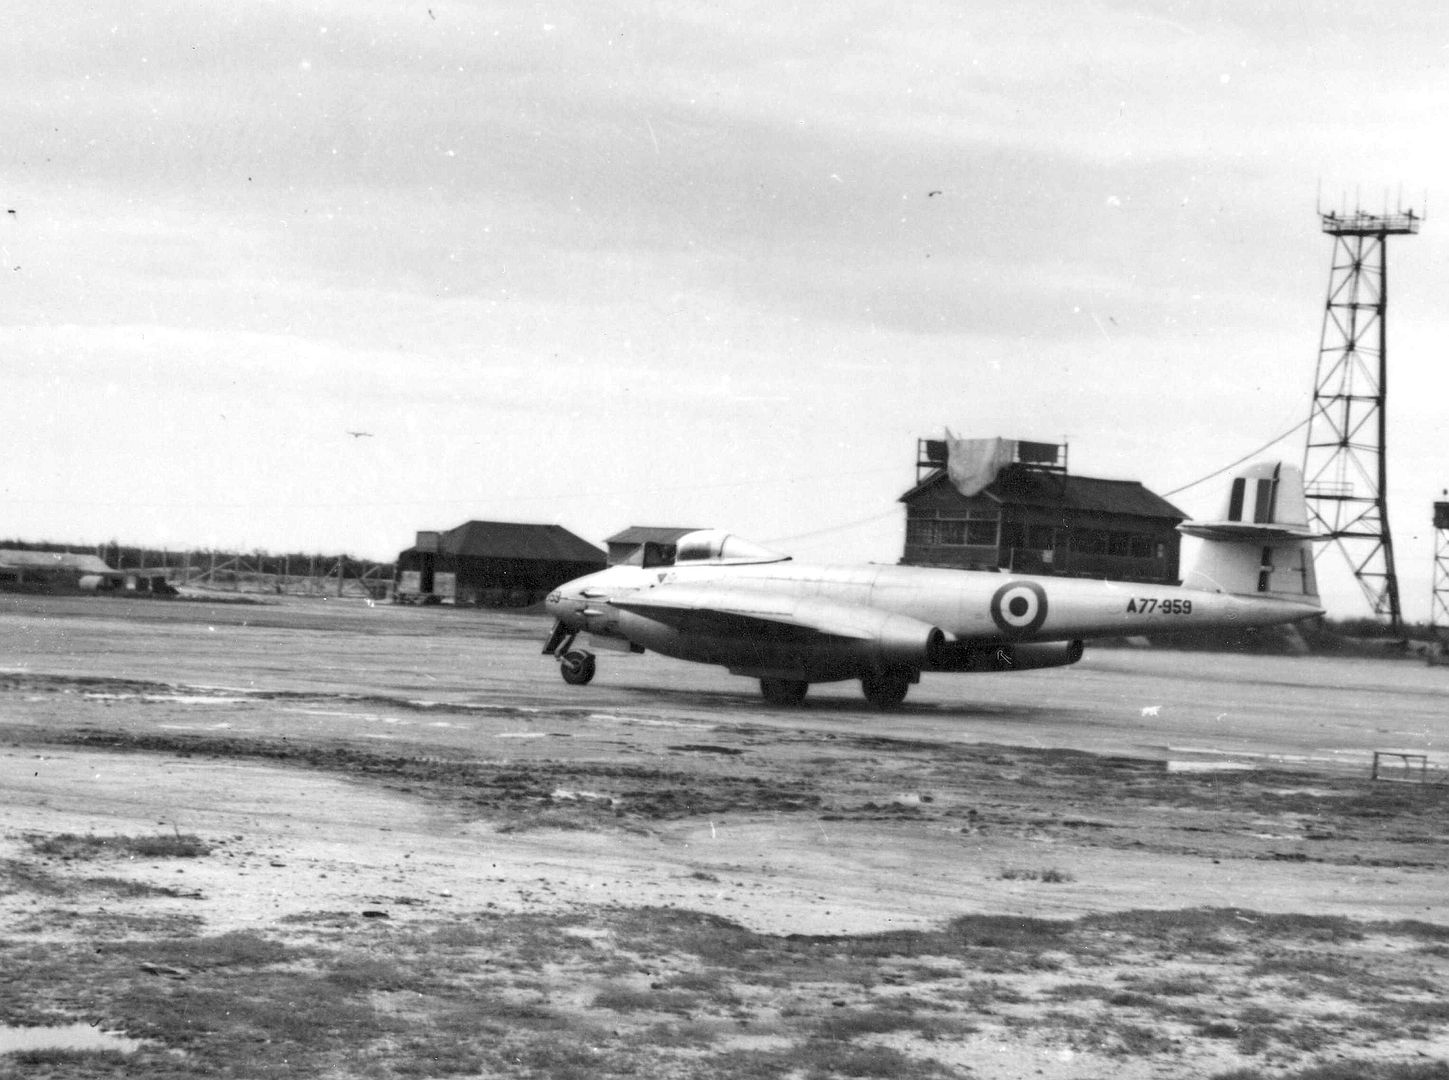 Gloster Meteor Aeroplane Taxies Away From The Hangars To The Runway Prior To Taking Off On A Training Flight In Southern Japan